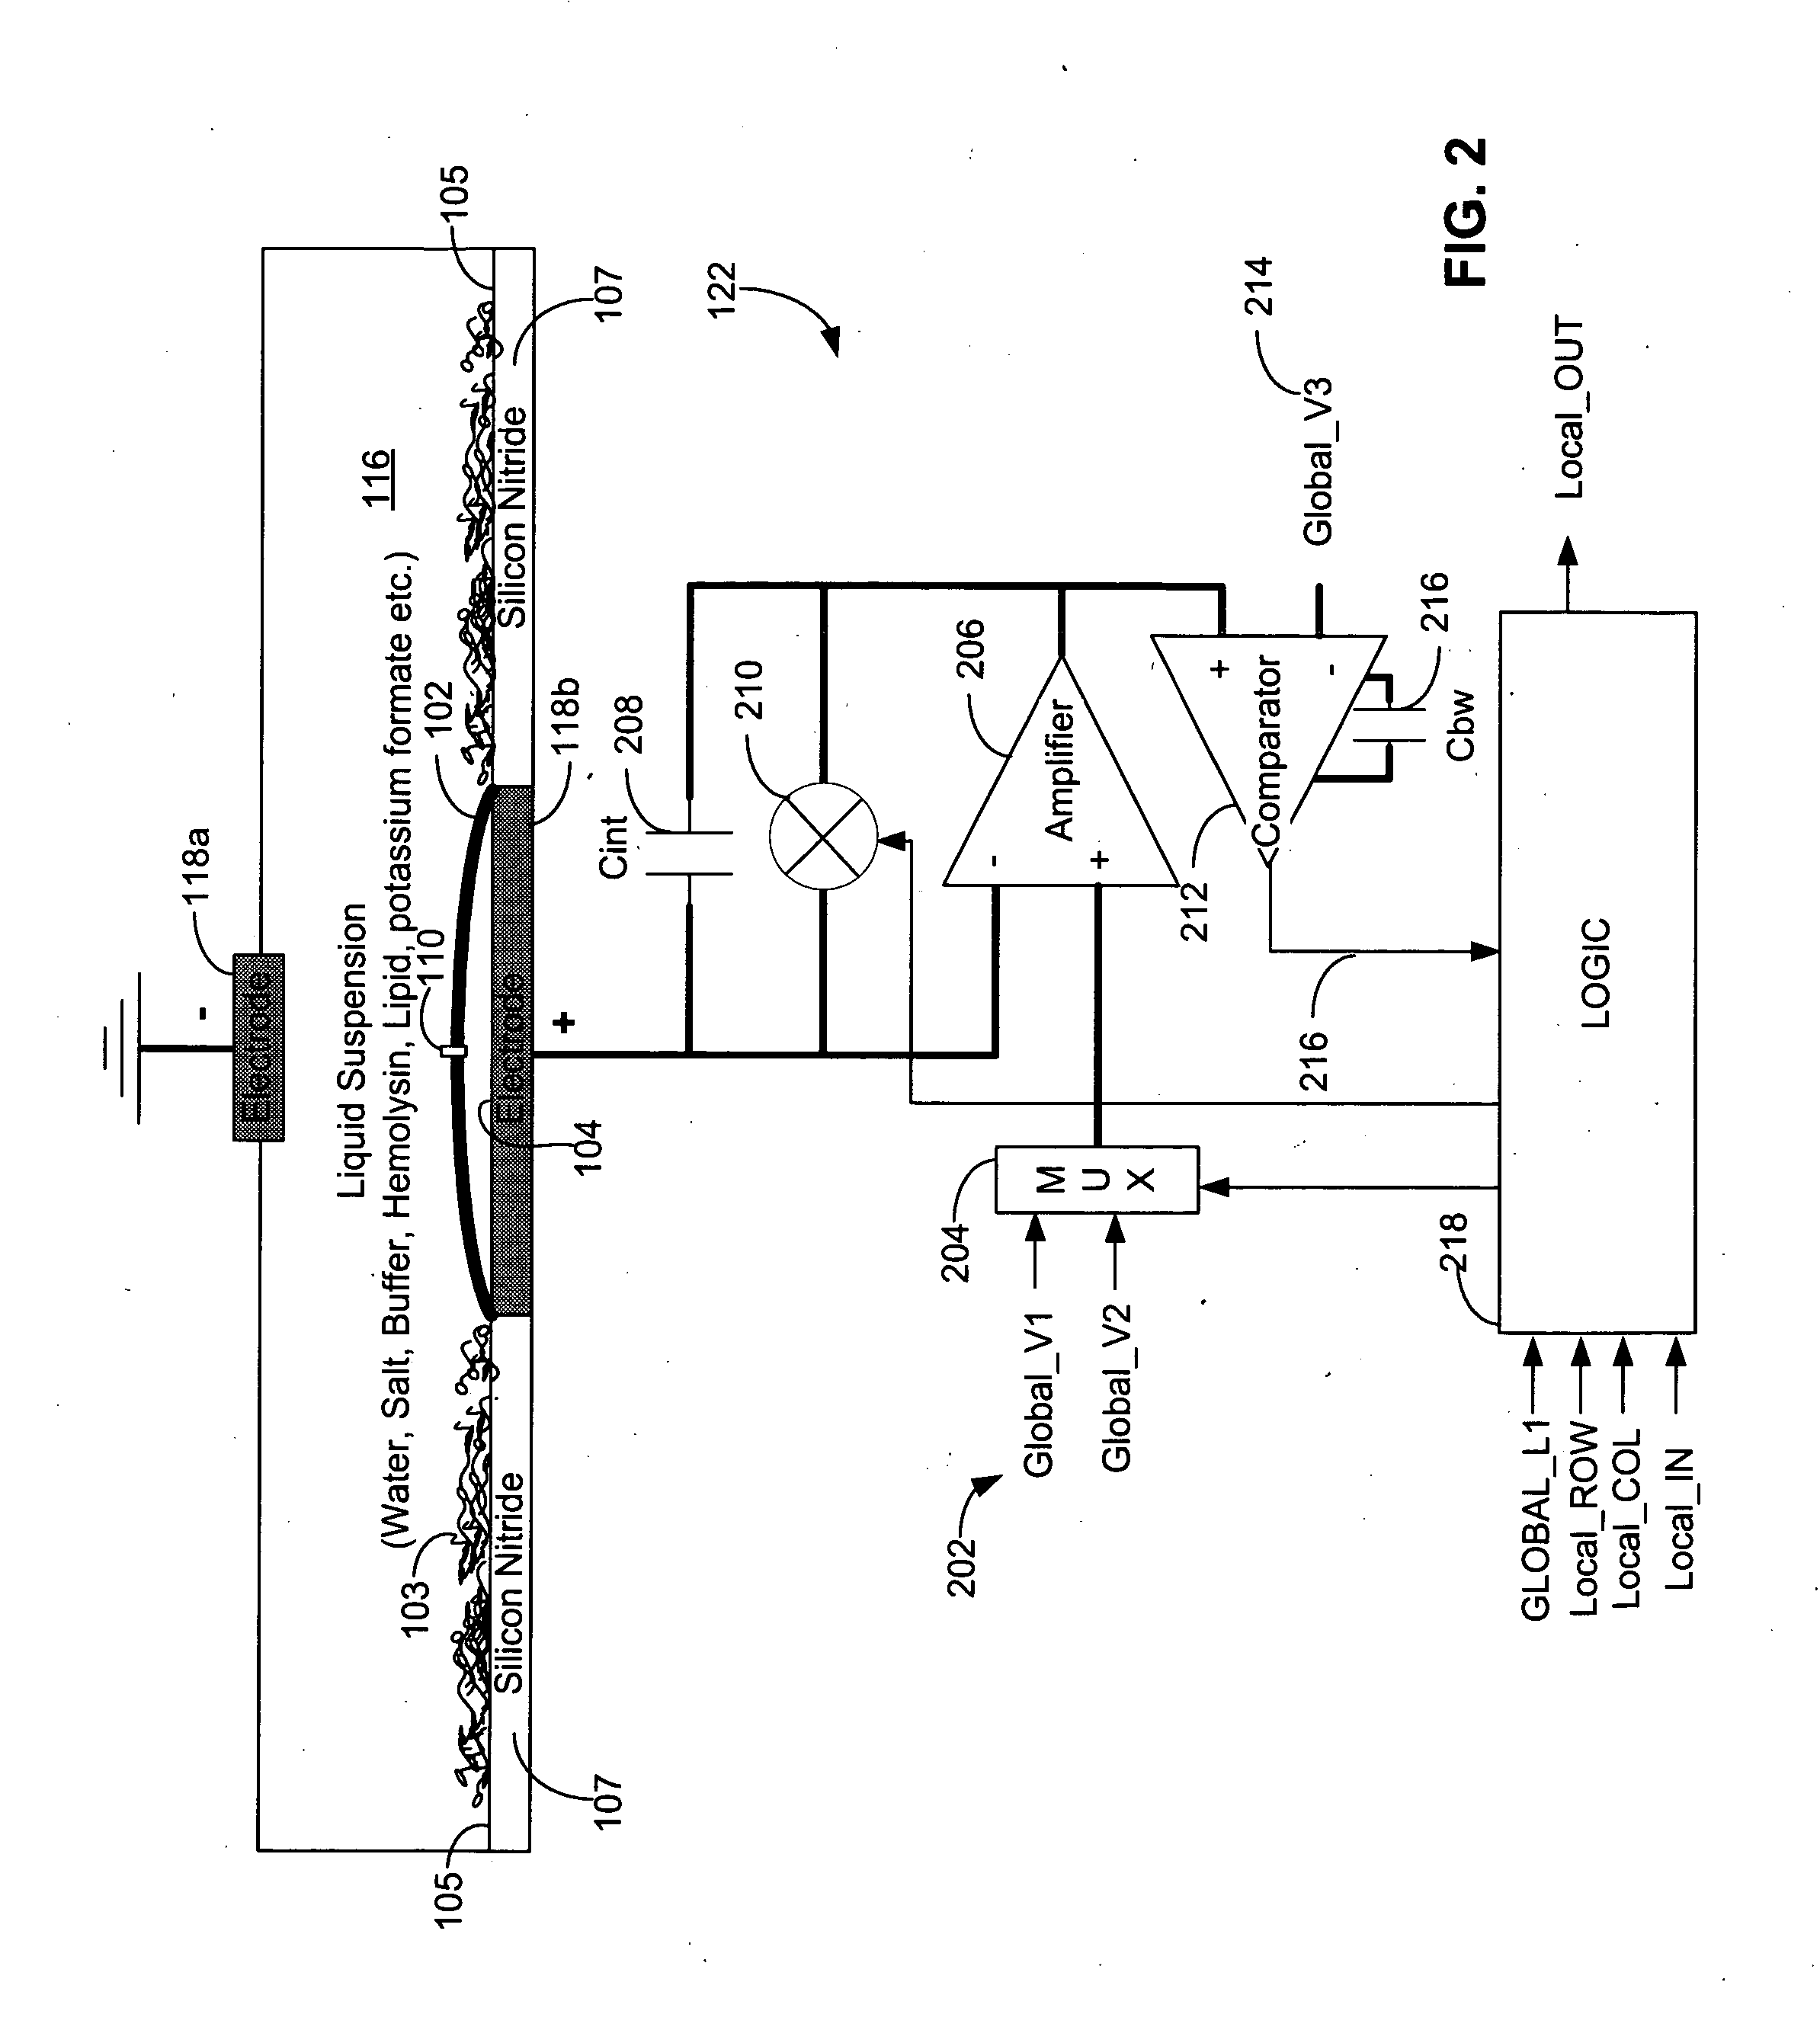 Systems and methods for characterizing a molecule